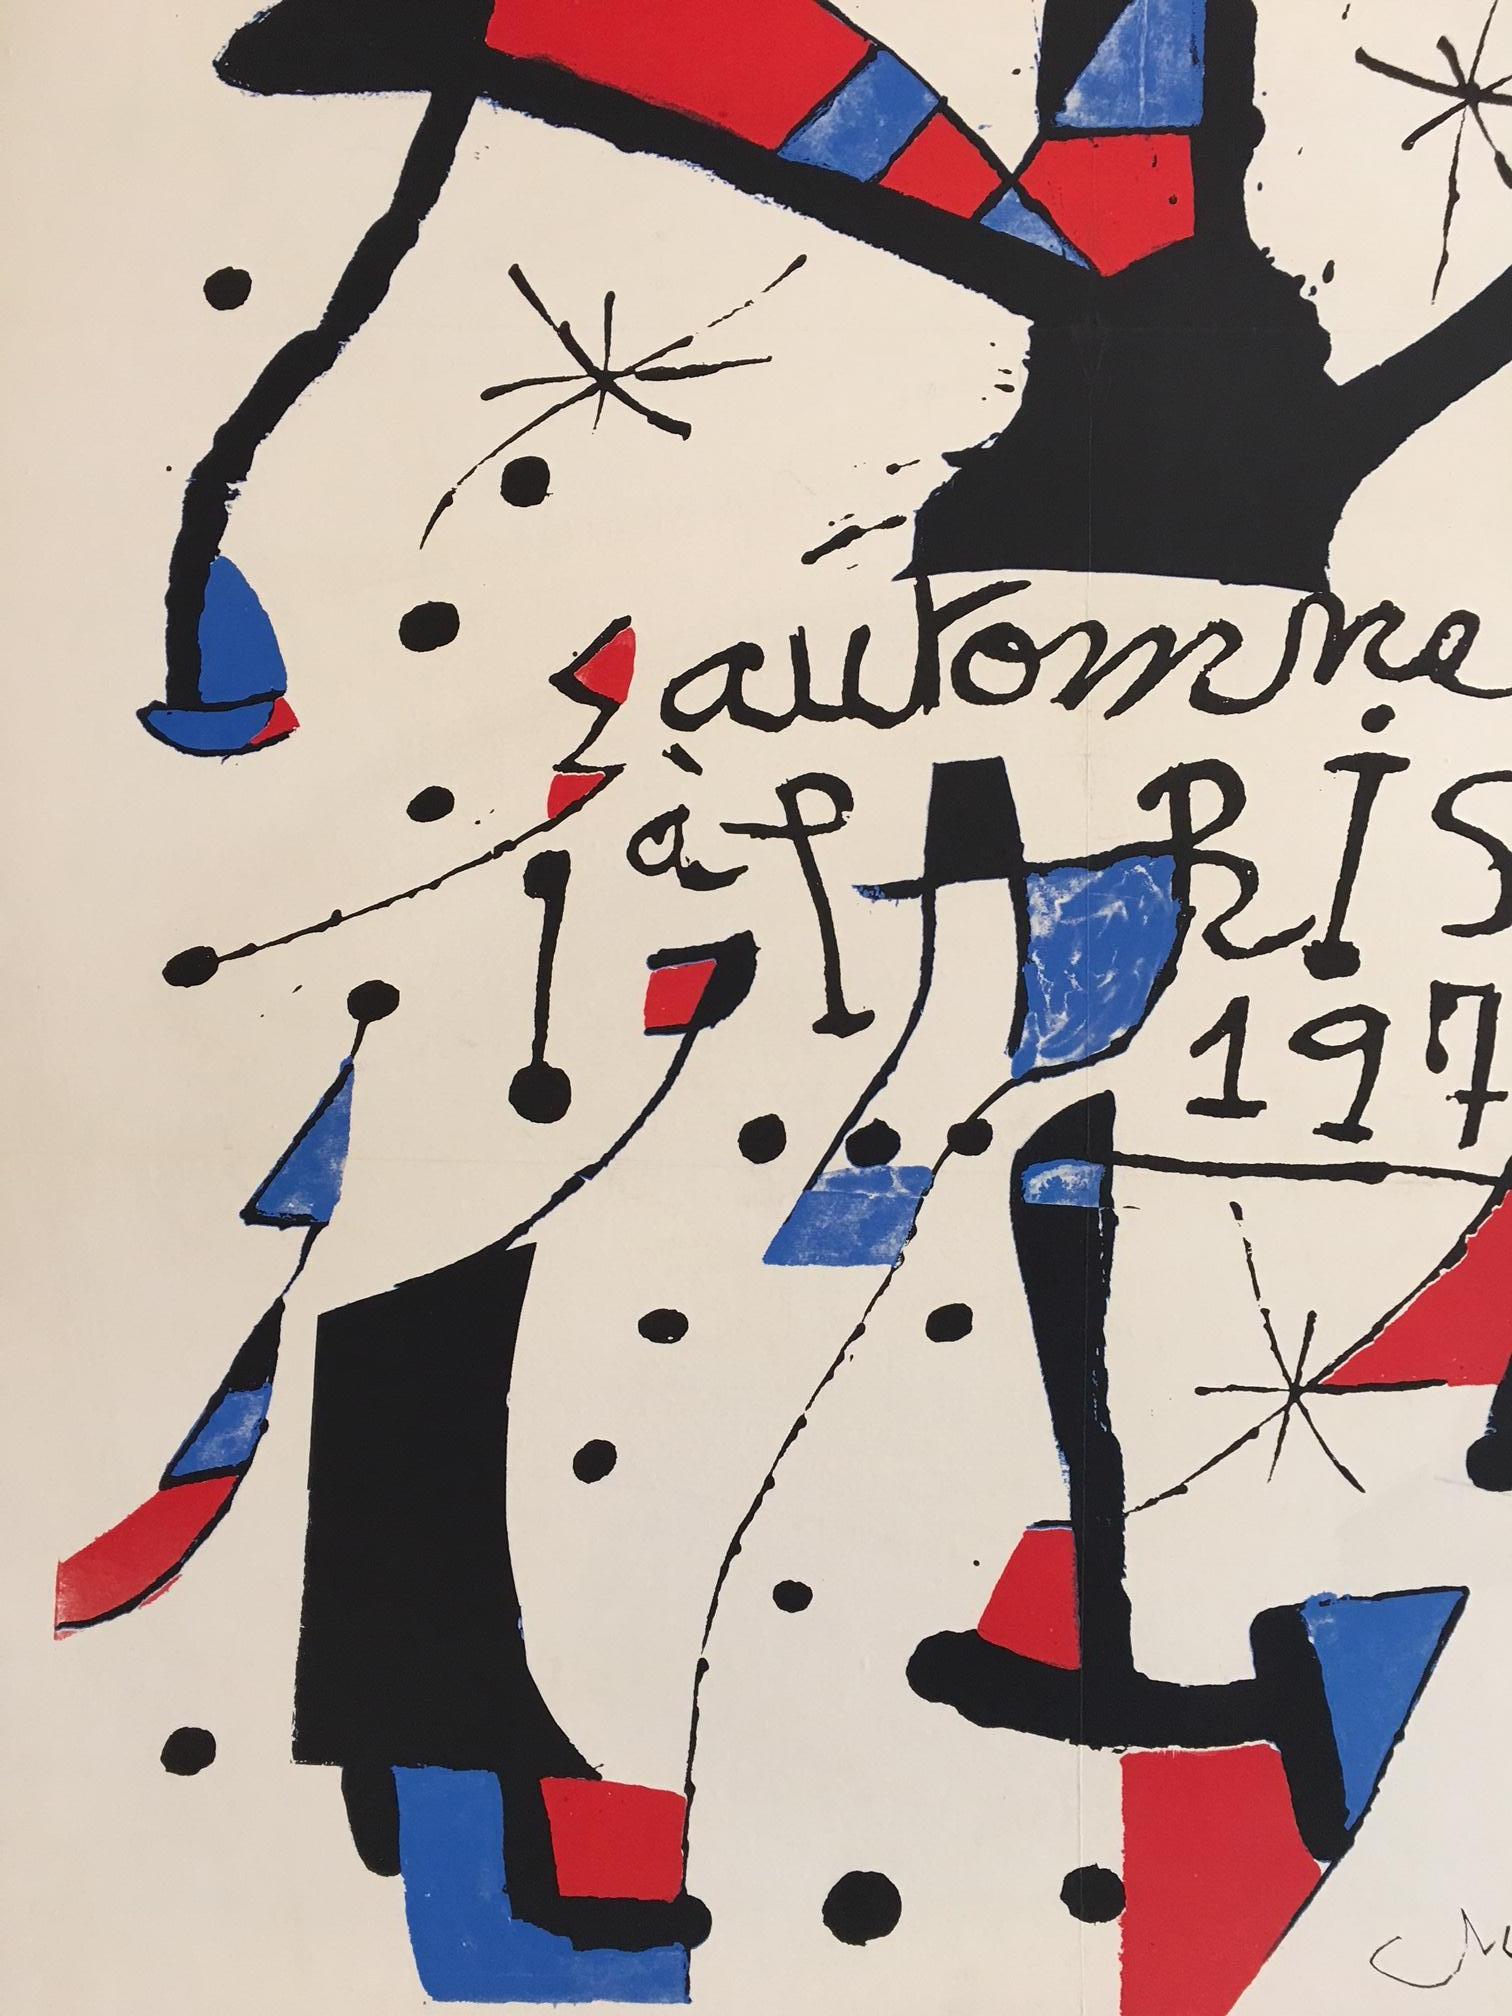 Artist: 
Joan Miro

Year 
1972.

Dimensions: 
129 x 89 cm

Condition: 
Excellent

Format: 
Linen backed.

 